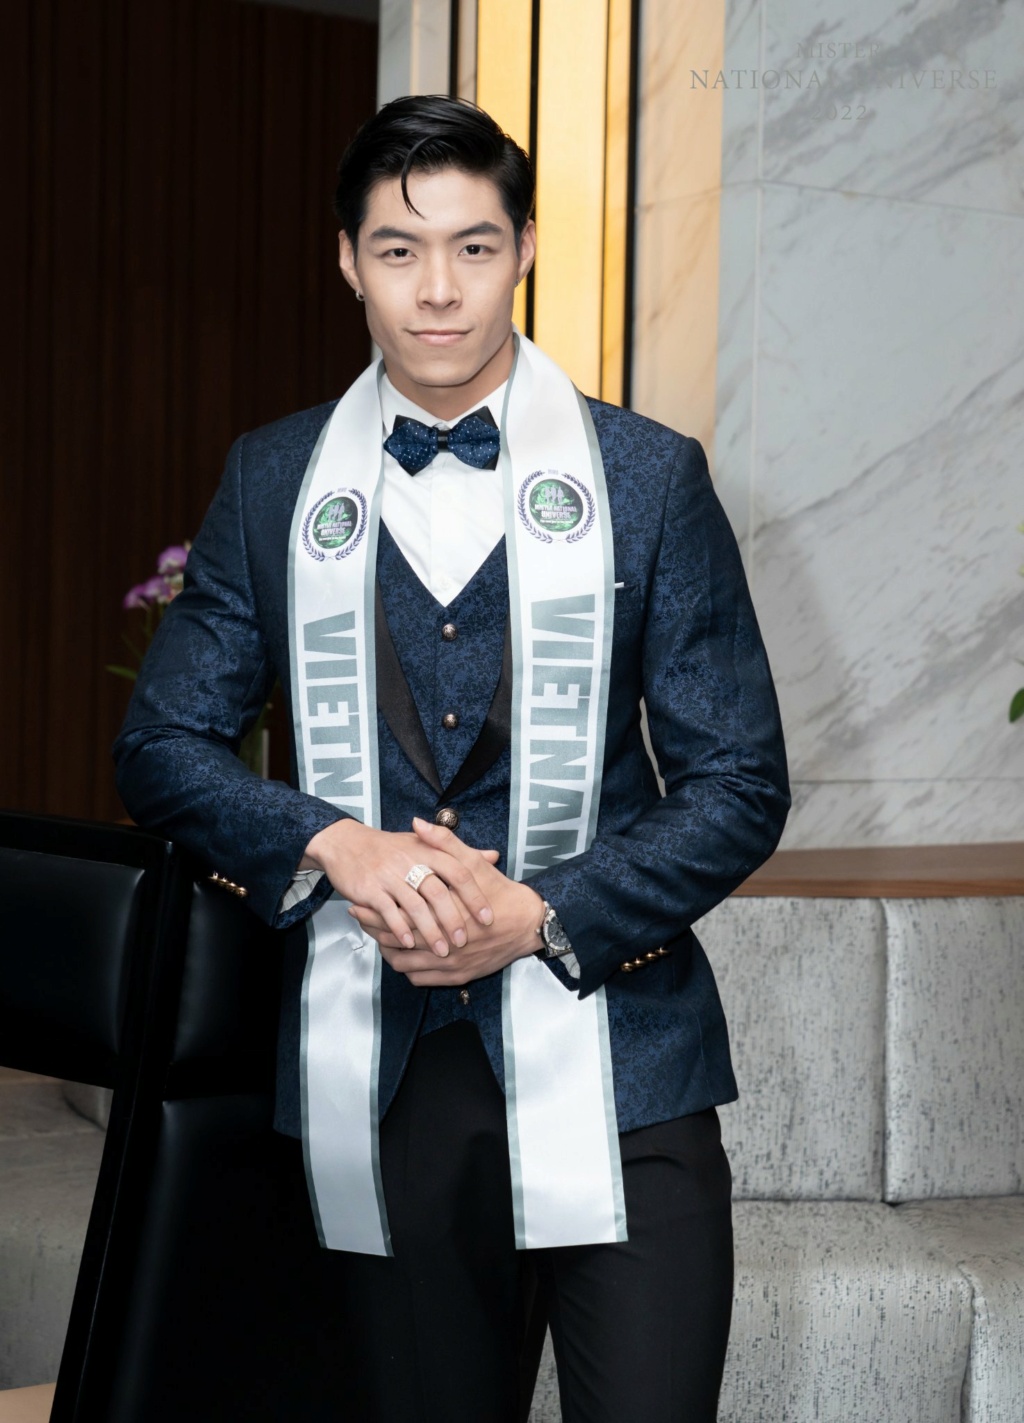 Mister National Universe 2022 is Việt Hoàng from Vietnam 28479311